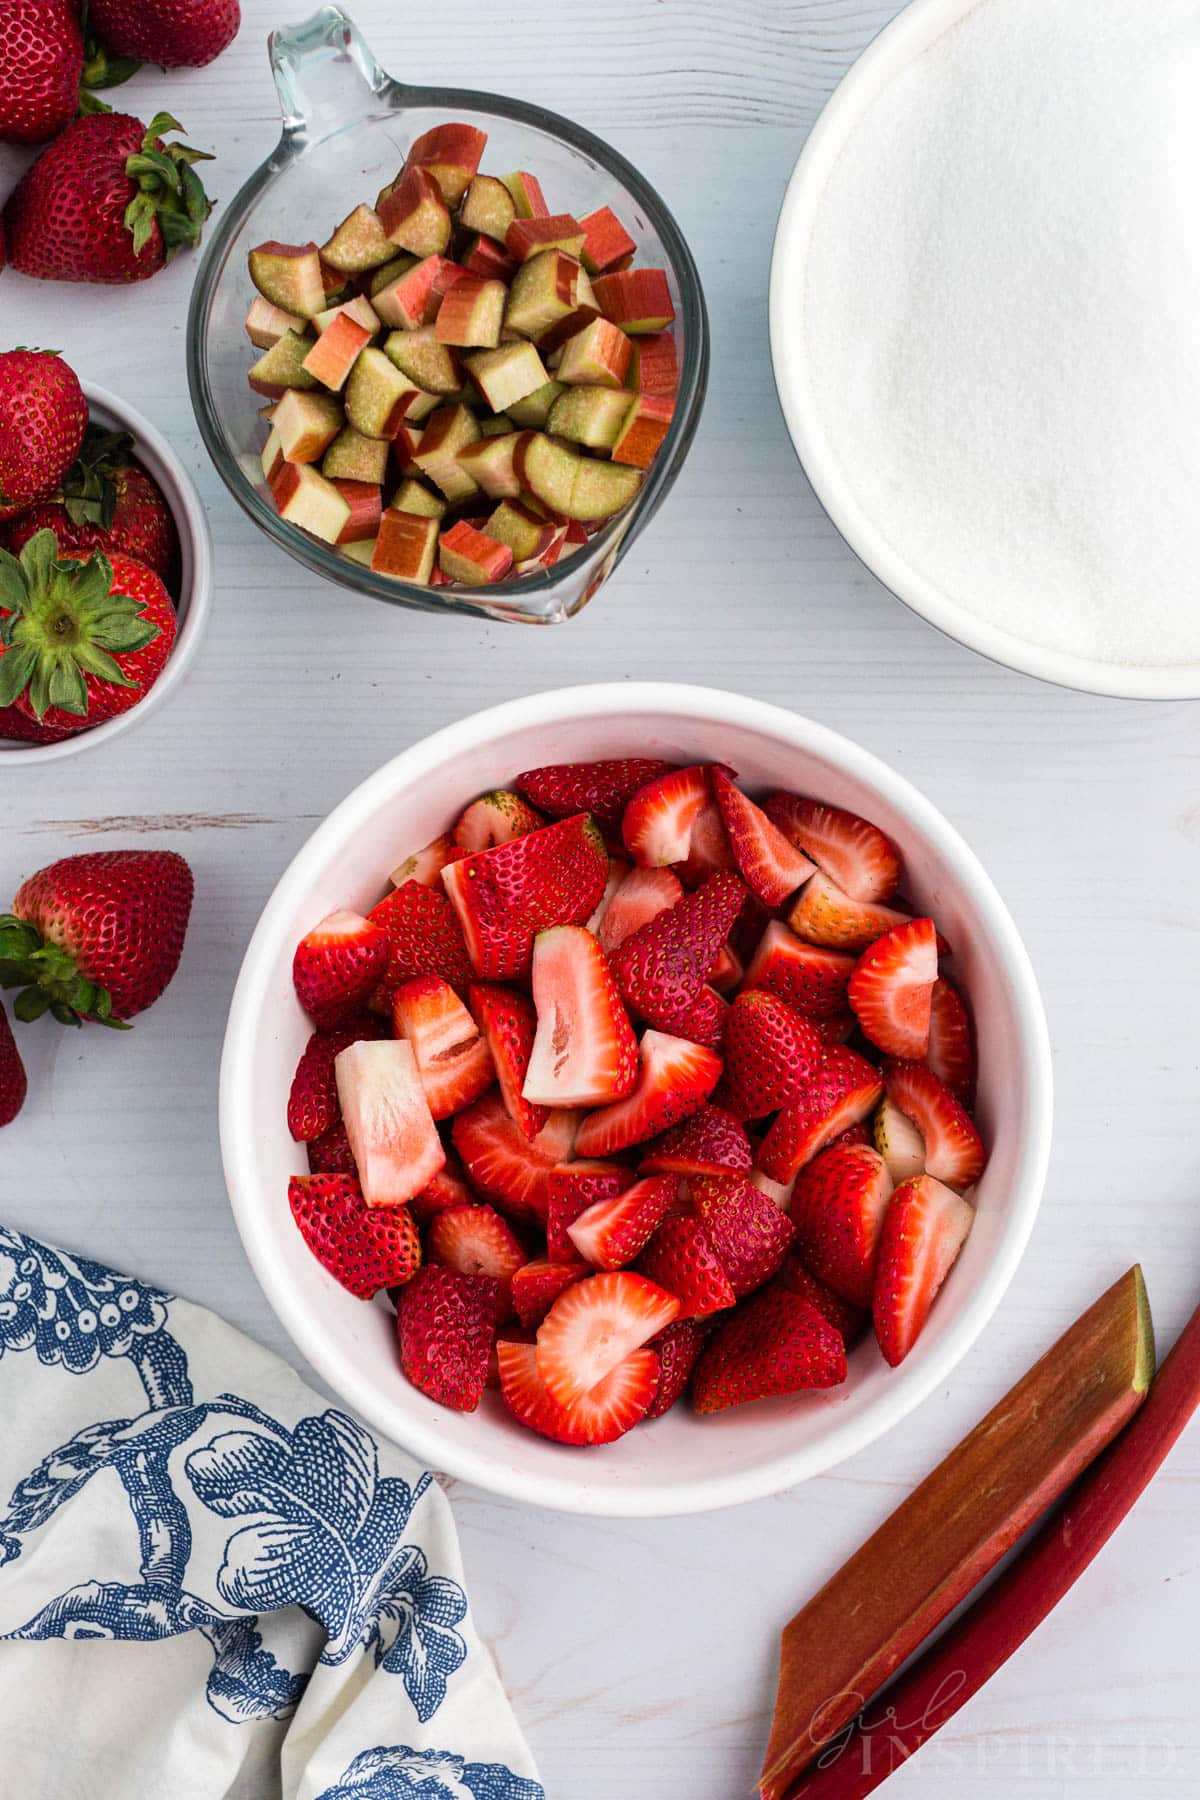 Sliced strawberry pieces and rhubarb pieces measured into bowls.